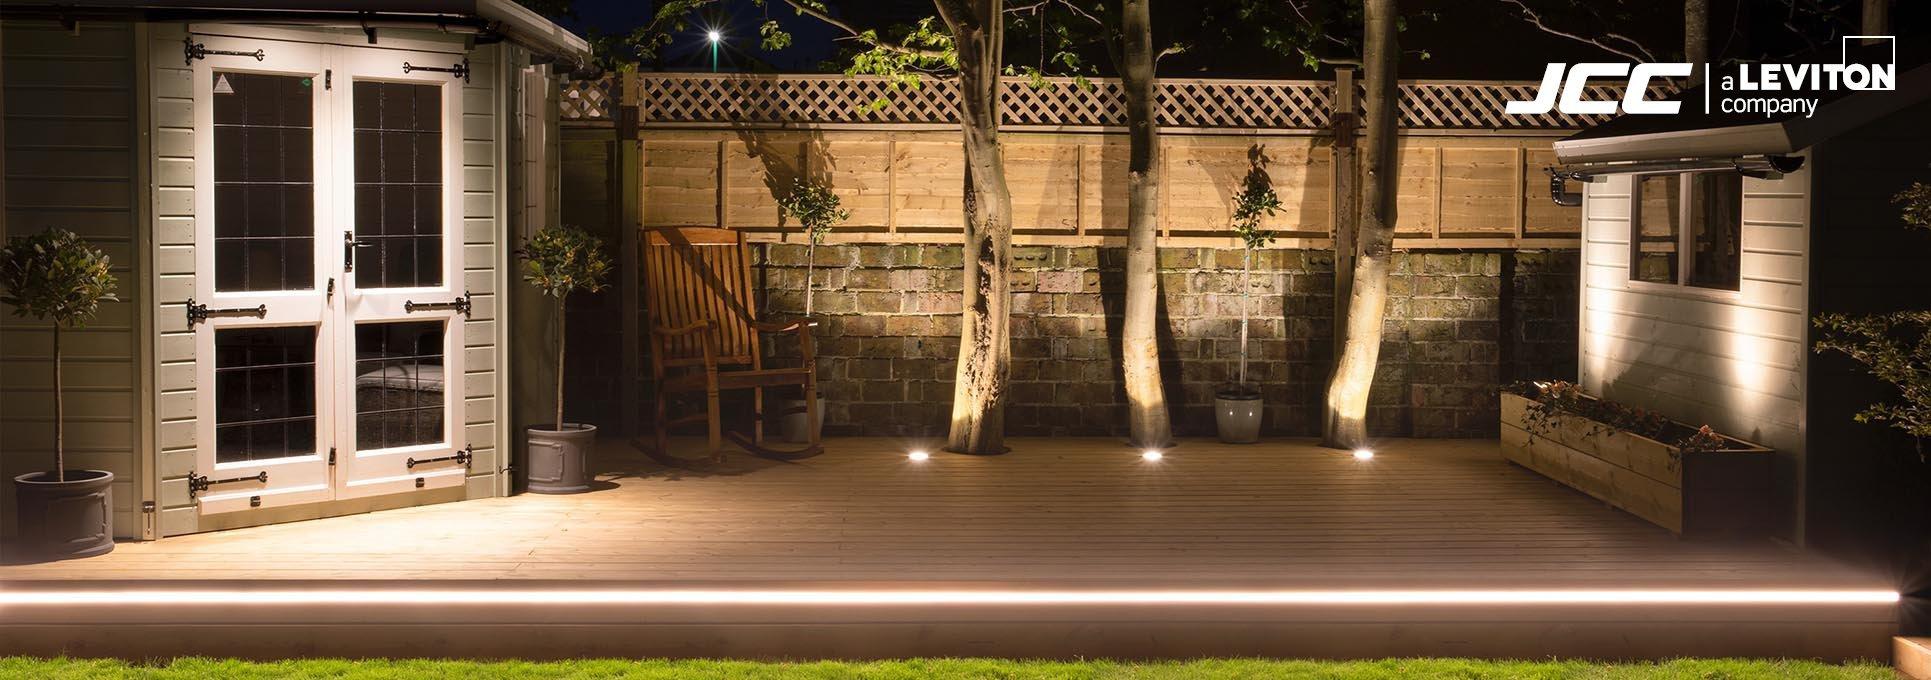 JCC are market leaders in the development of cutting-edge LED lighting technology, including downlights, bulkheads, floodlights, and garden lighting.